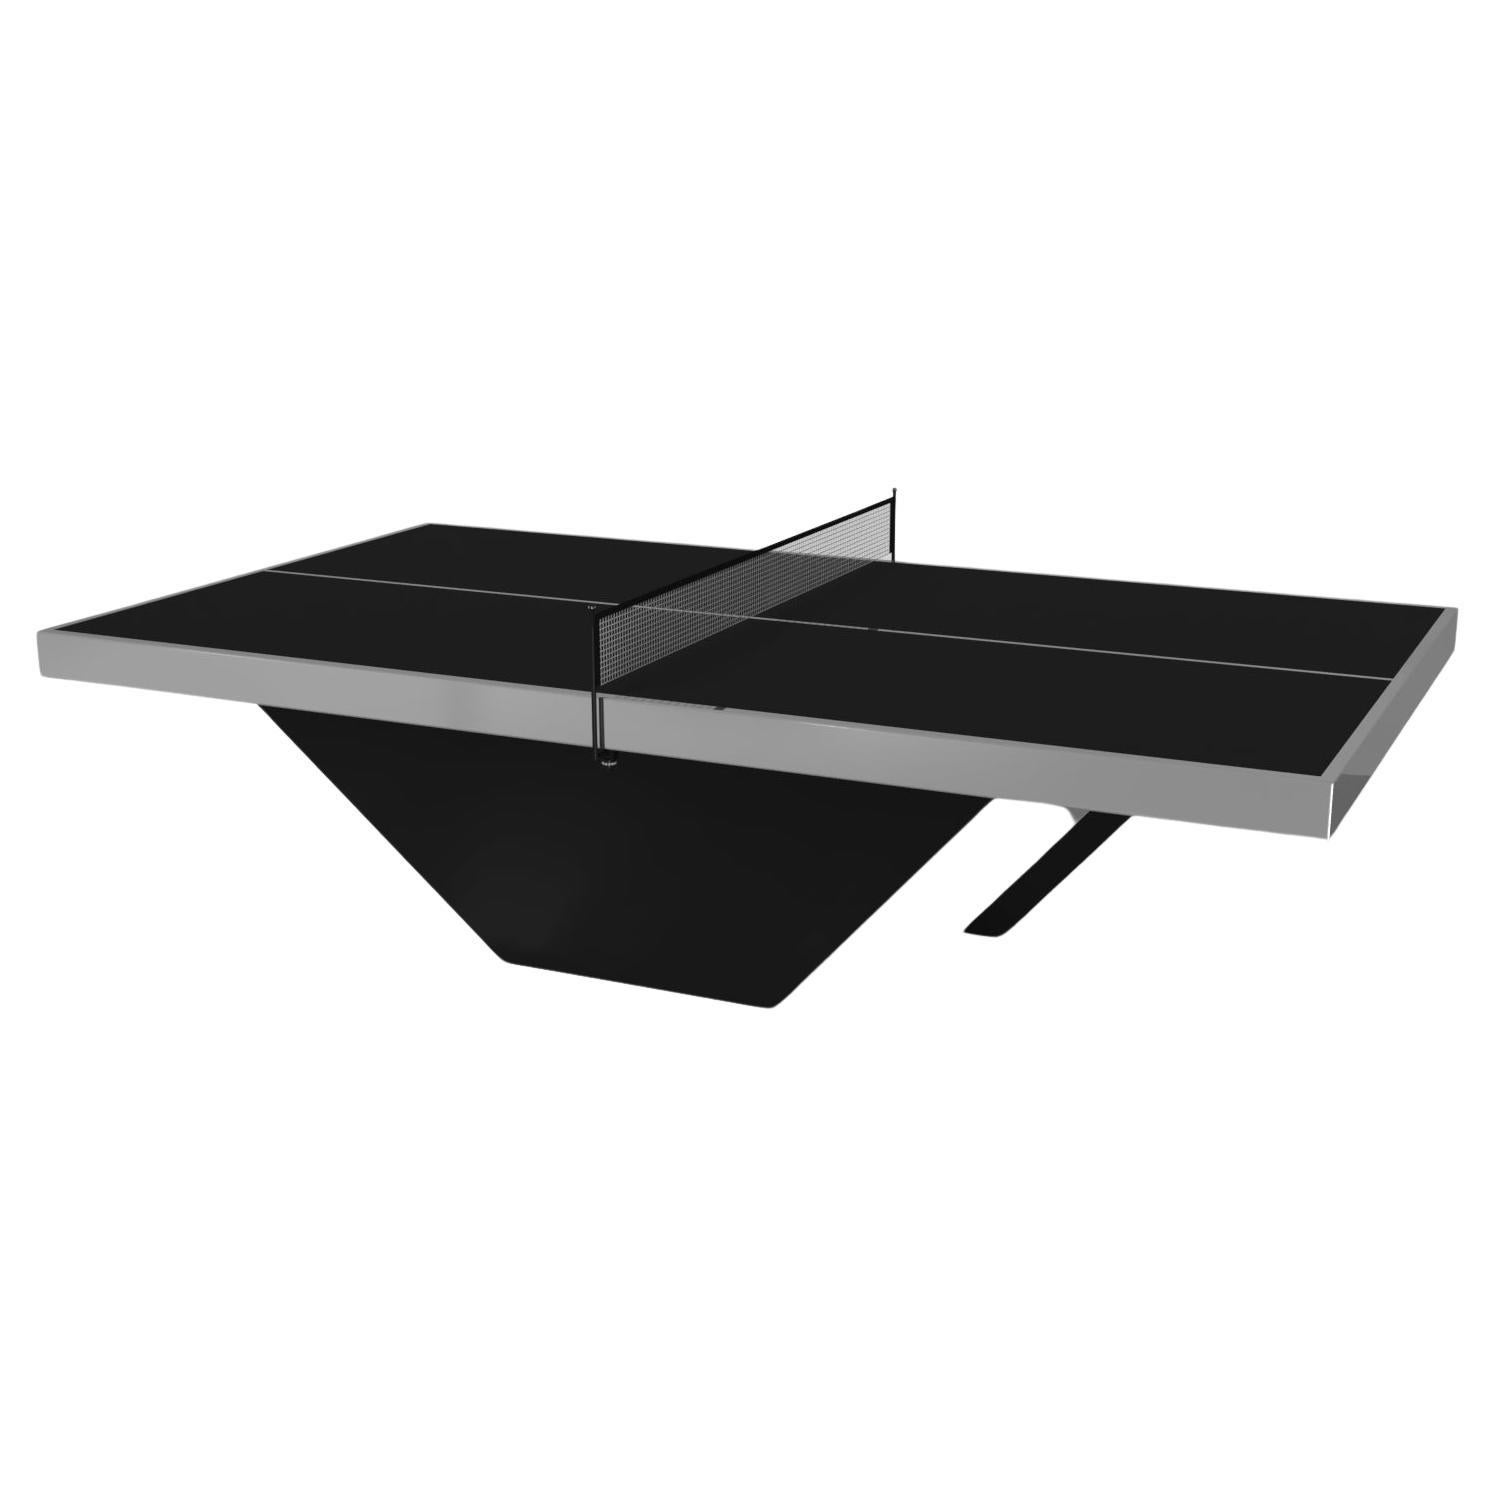 Elevate Customs Vogue Tennis Table / Stainless Steel Metal in 9' - Made in USA For Sale